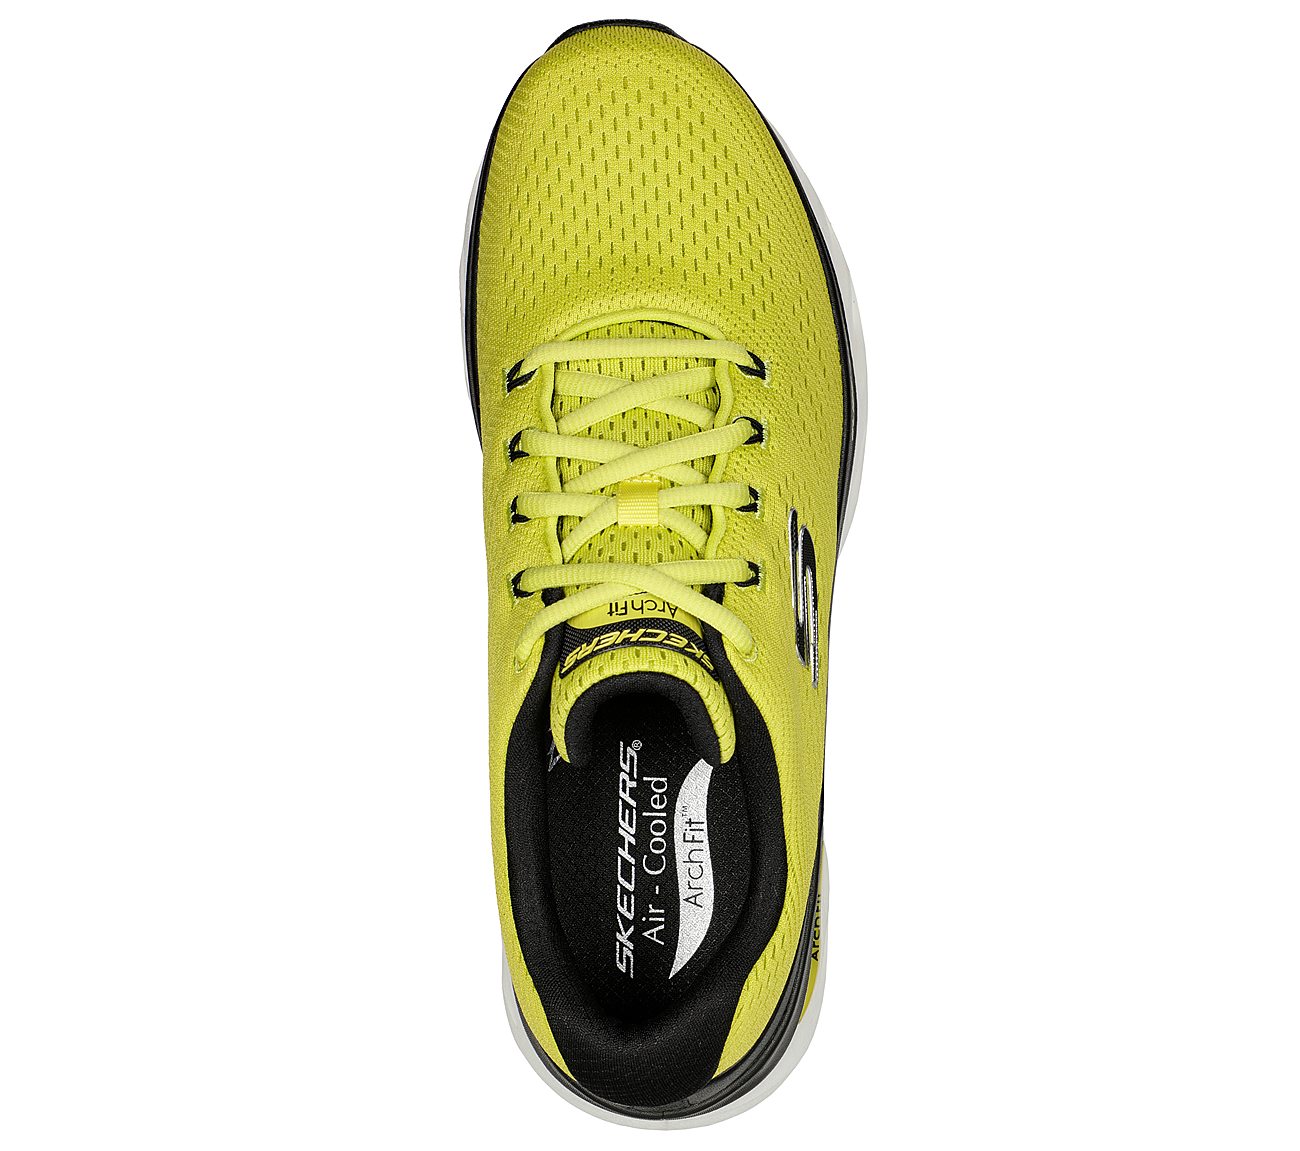 ARCH FIT GLIDE-STEP, LIME/BLACK Footwear Top View